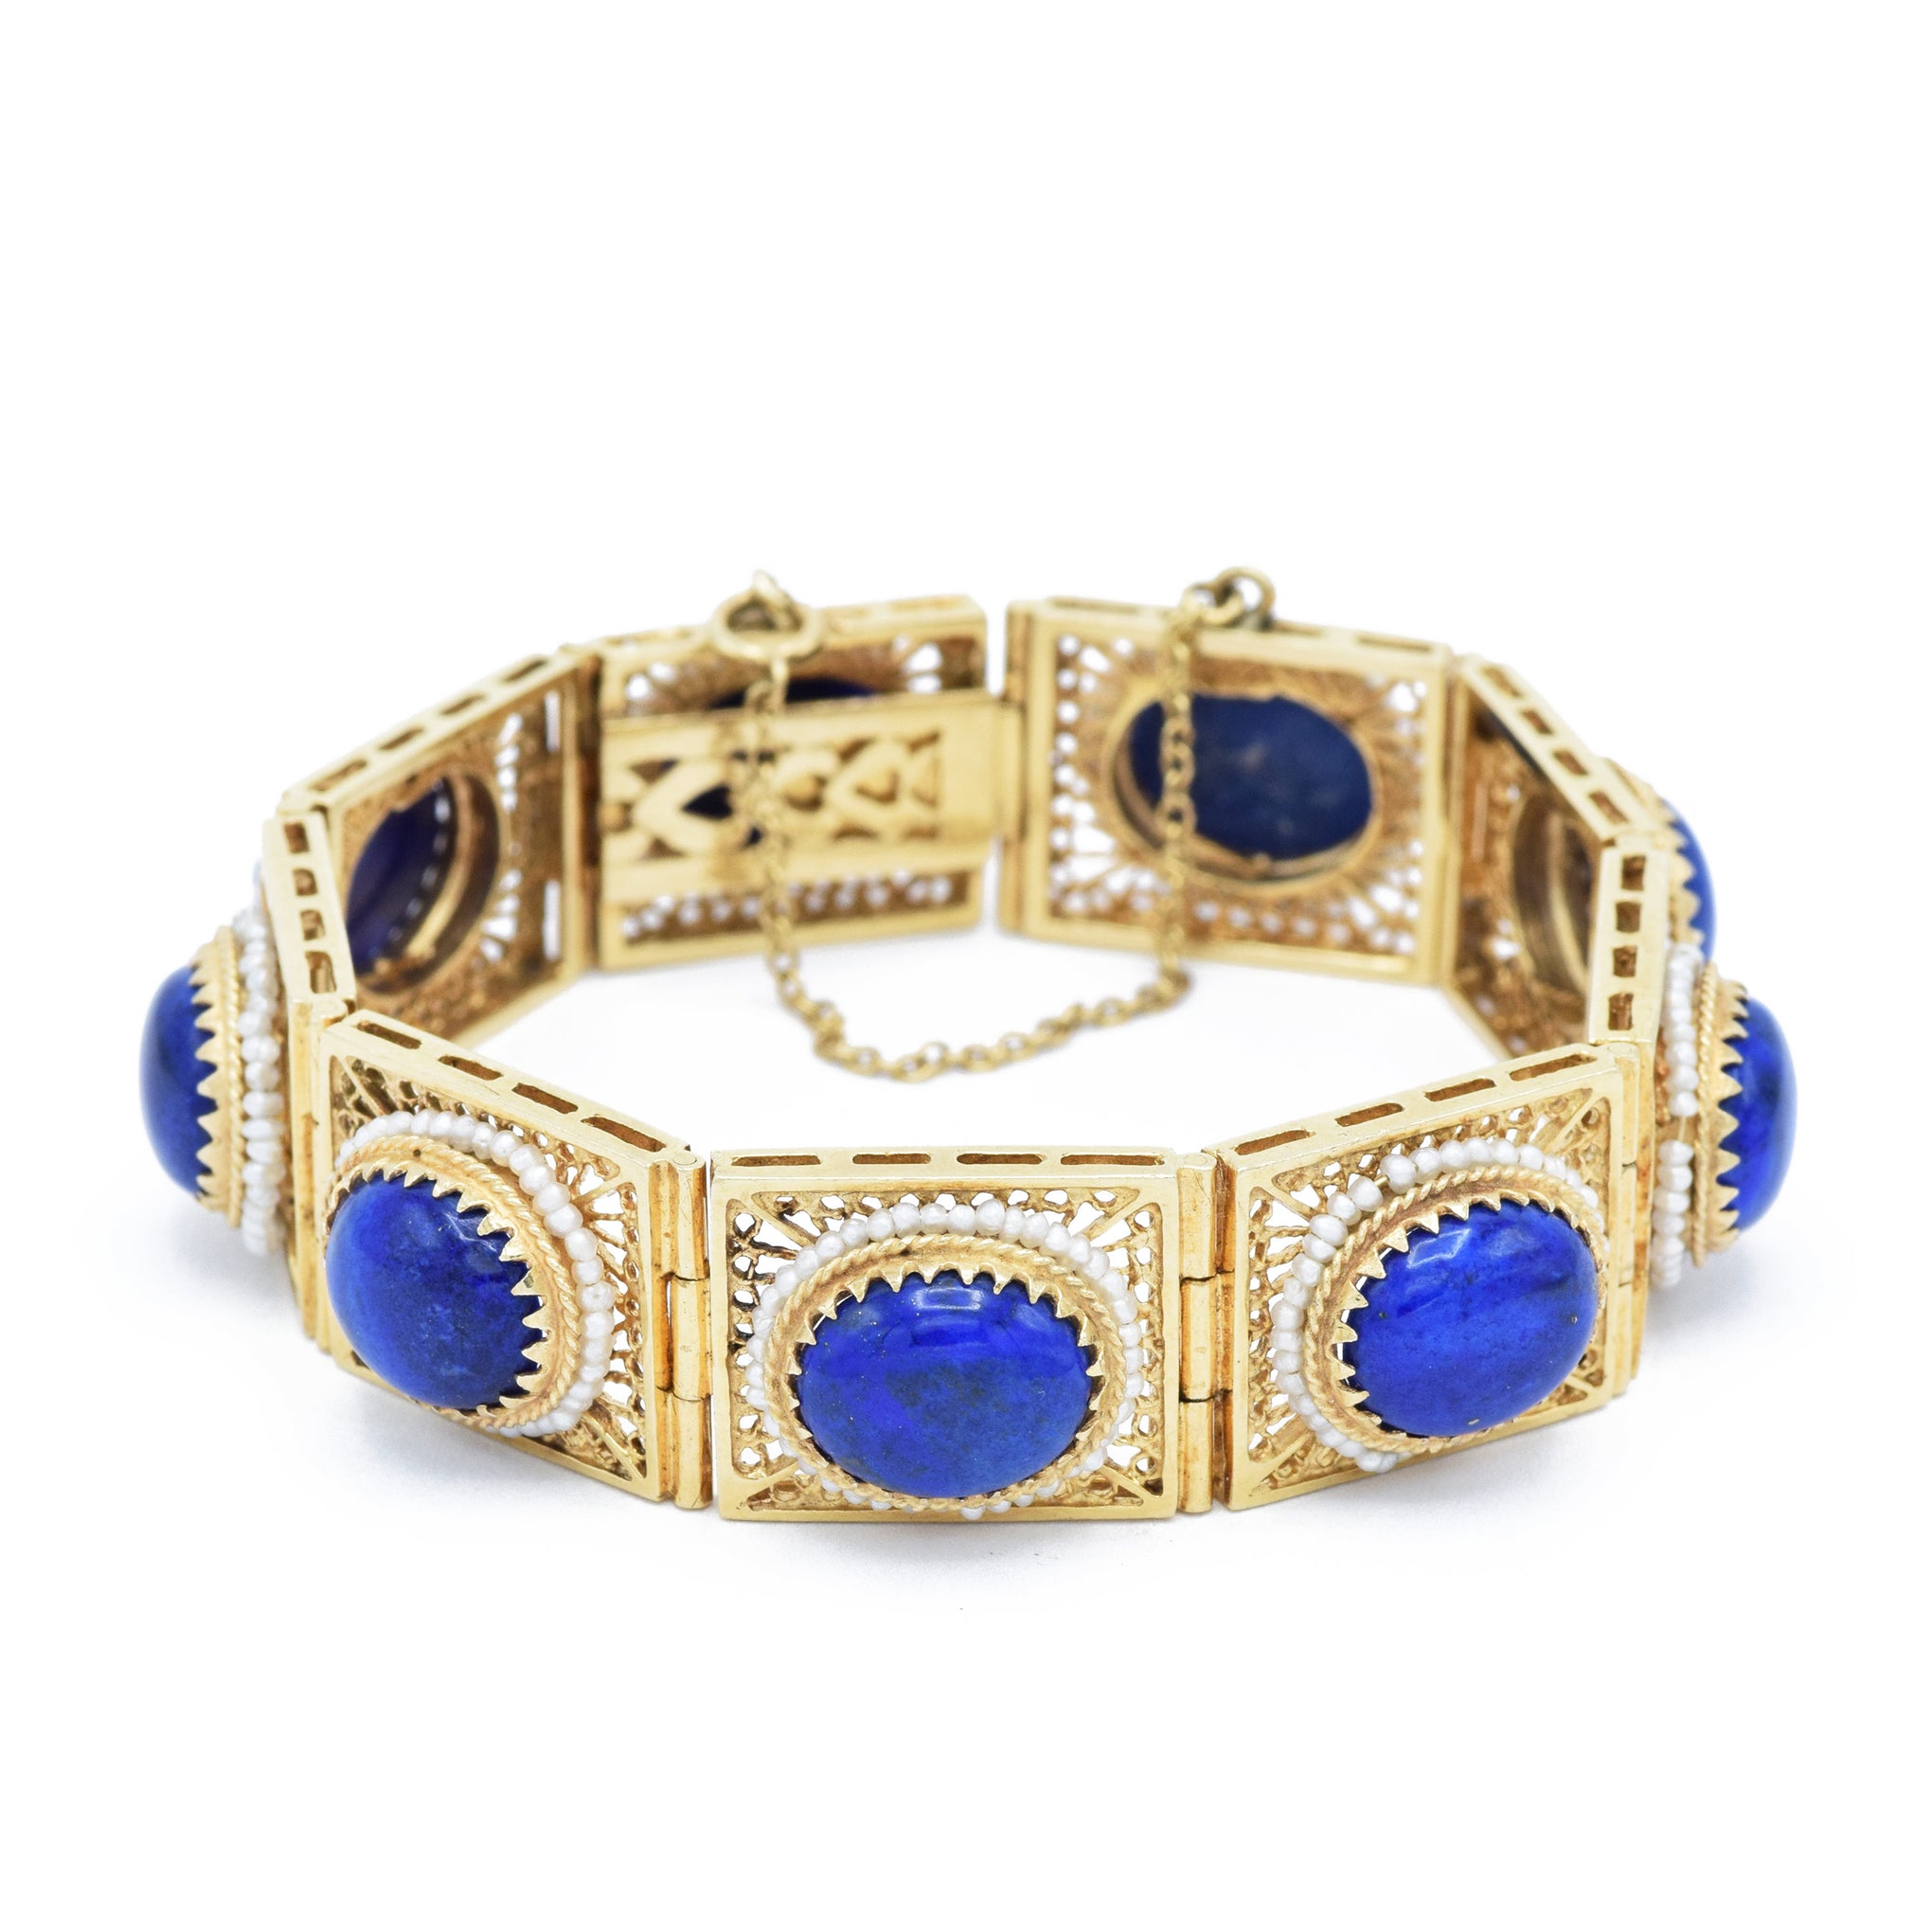 Victorian Lapis Lazuli and Seed Pearl Bracelet